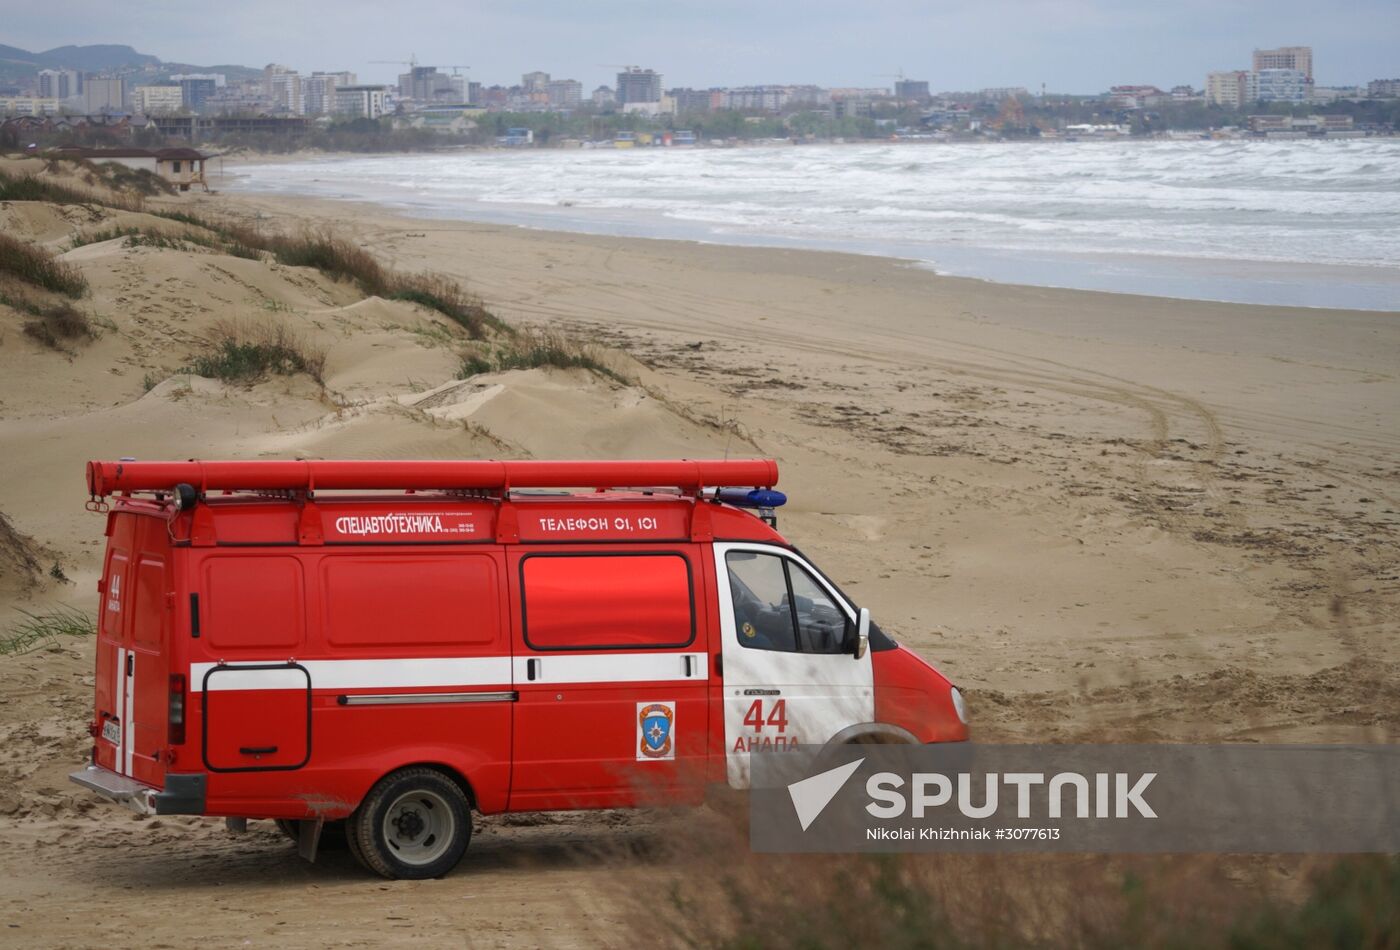 Search and rescue operation at Black Sea